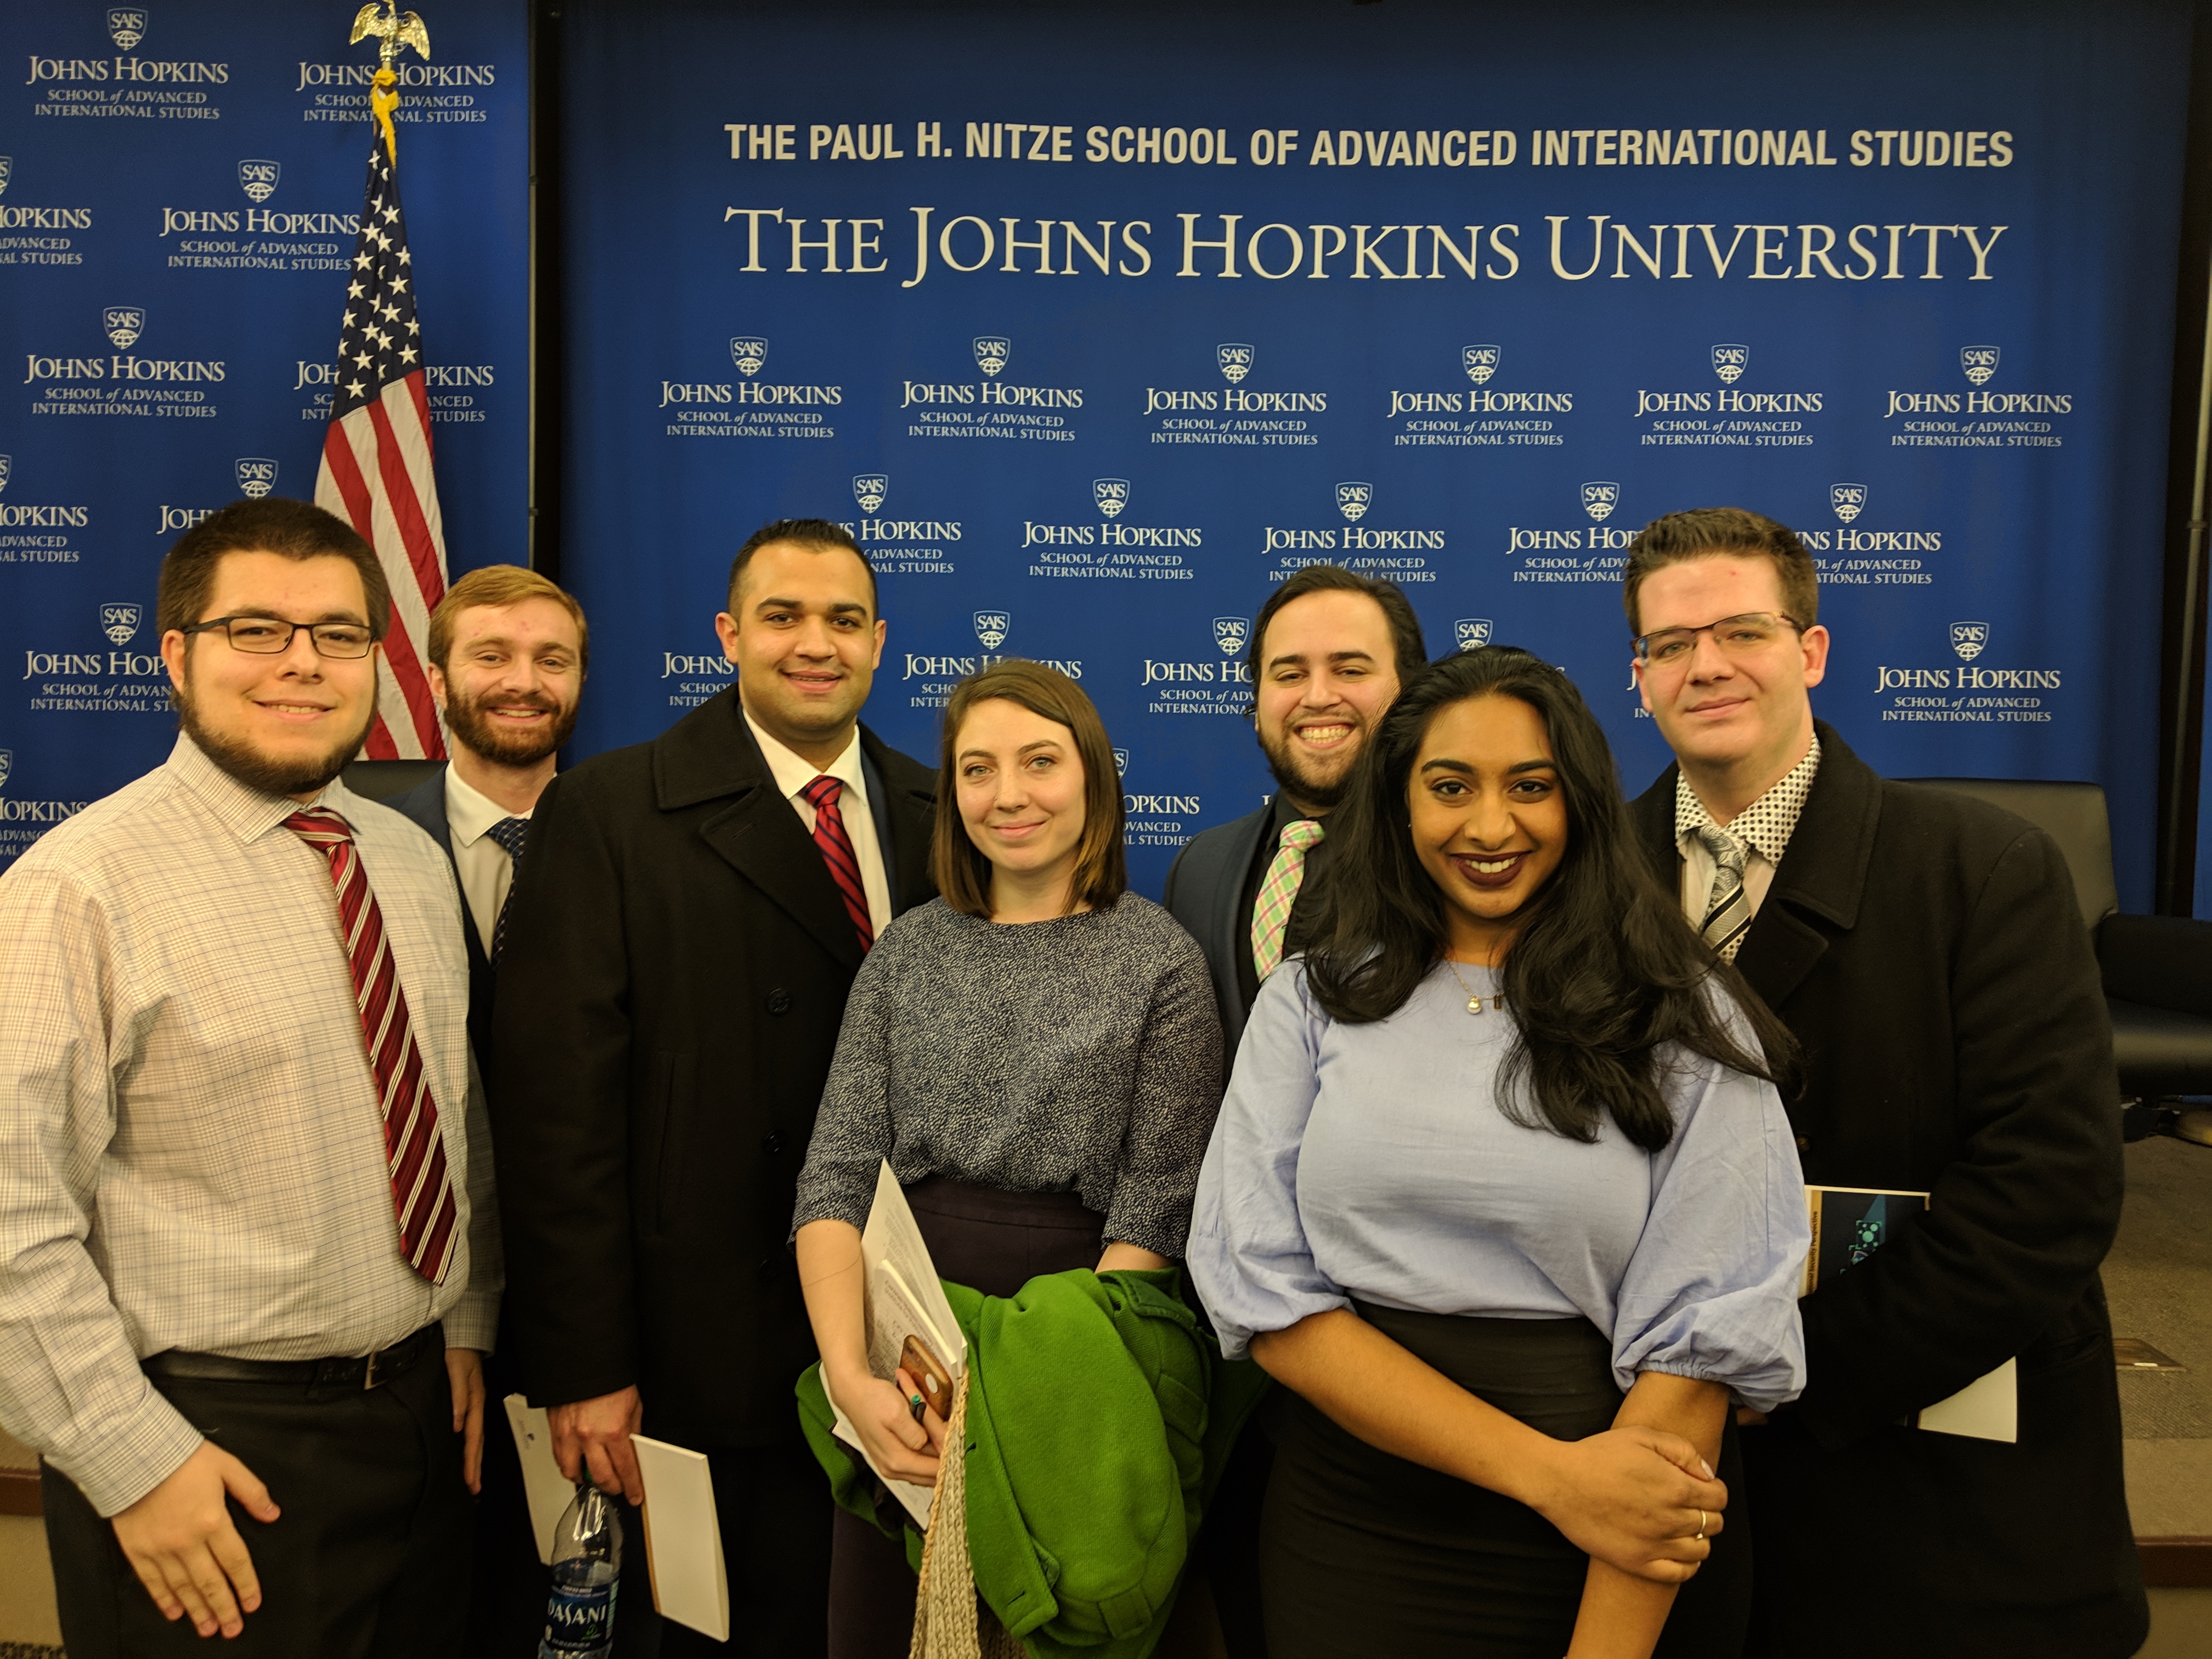 Students attended an event at Johns Hopkins University's School of Advanced International Studies.